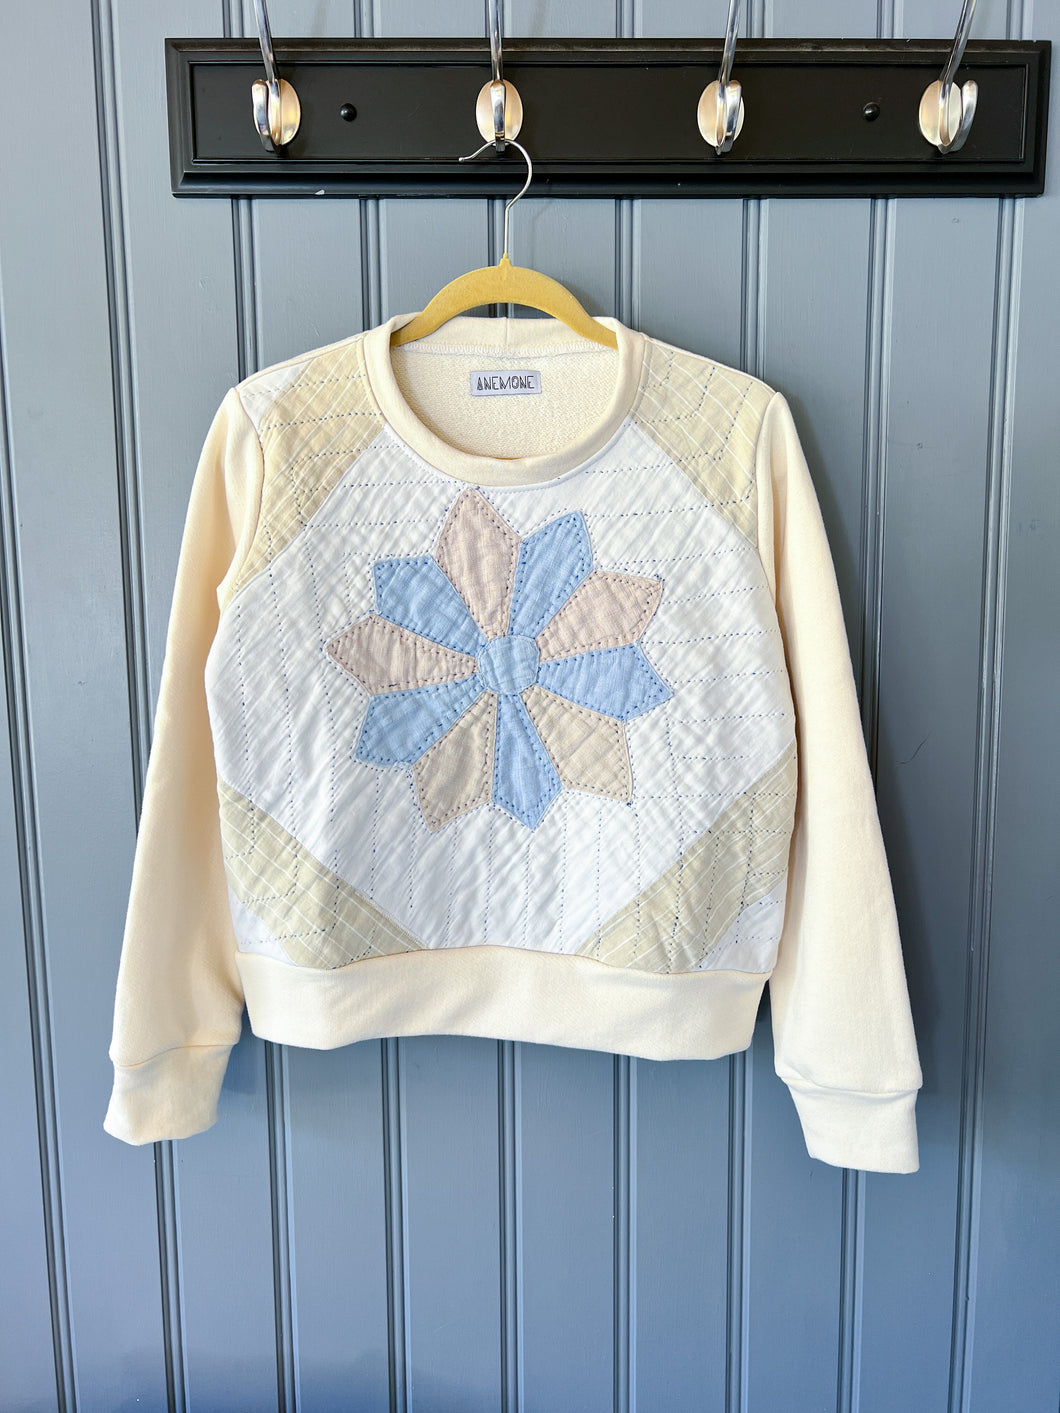 One-of-a-Kind: Dresden Plate French Terry Pullover (M)